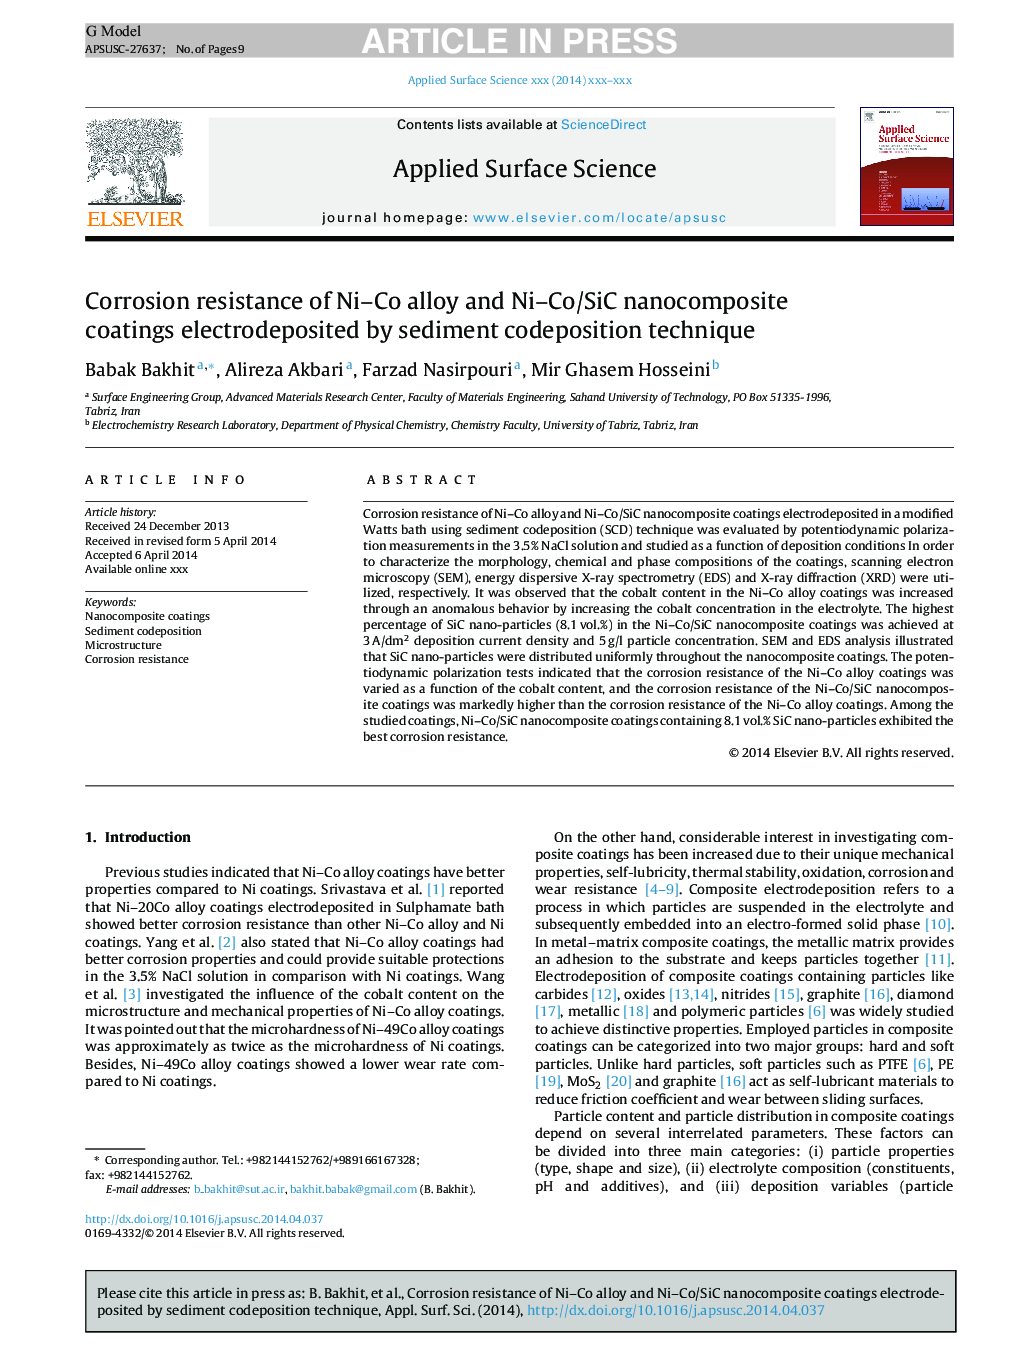 Corrosion resistance of Ni-Co alloy and Ni-Co/SiC nanocomposite coatings electrodeposited by sediment codeposition technique